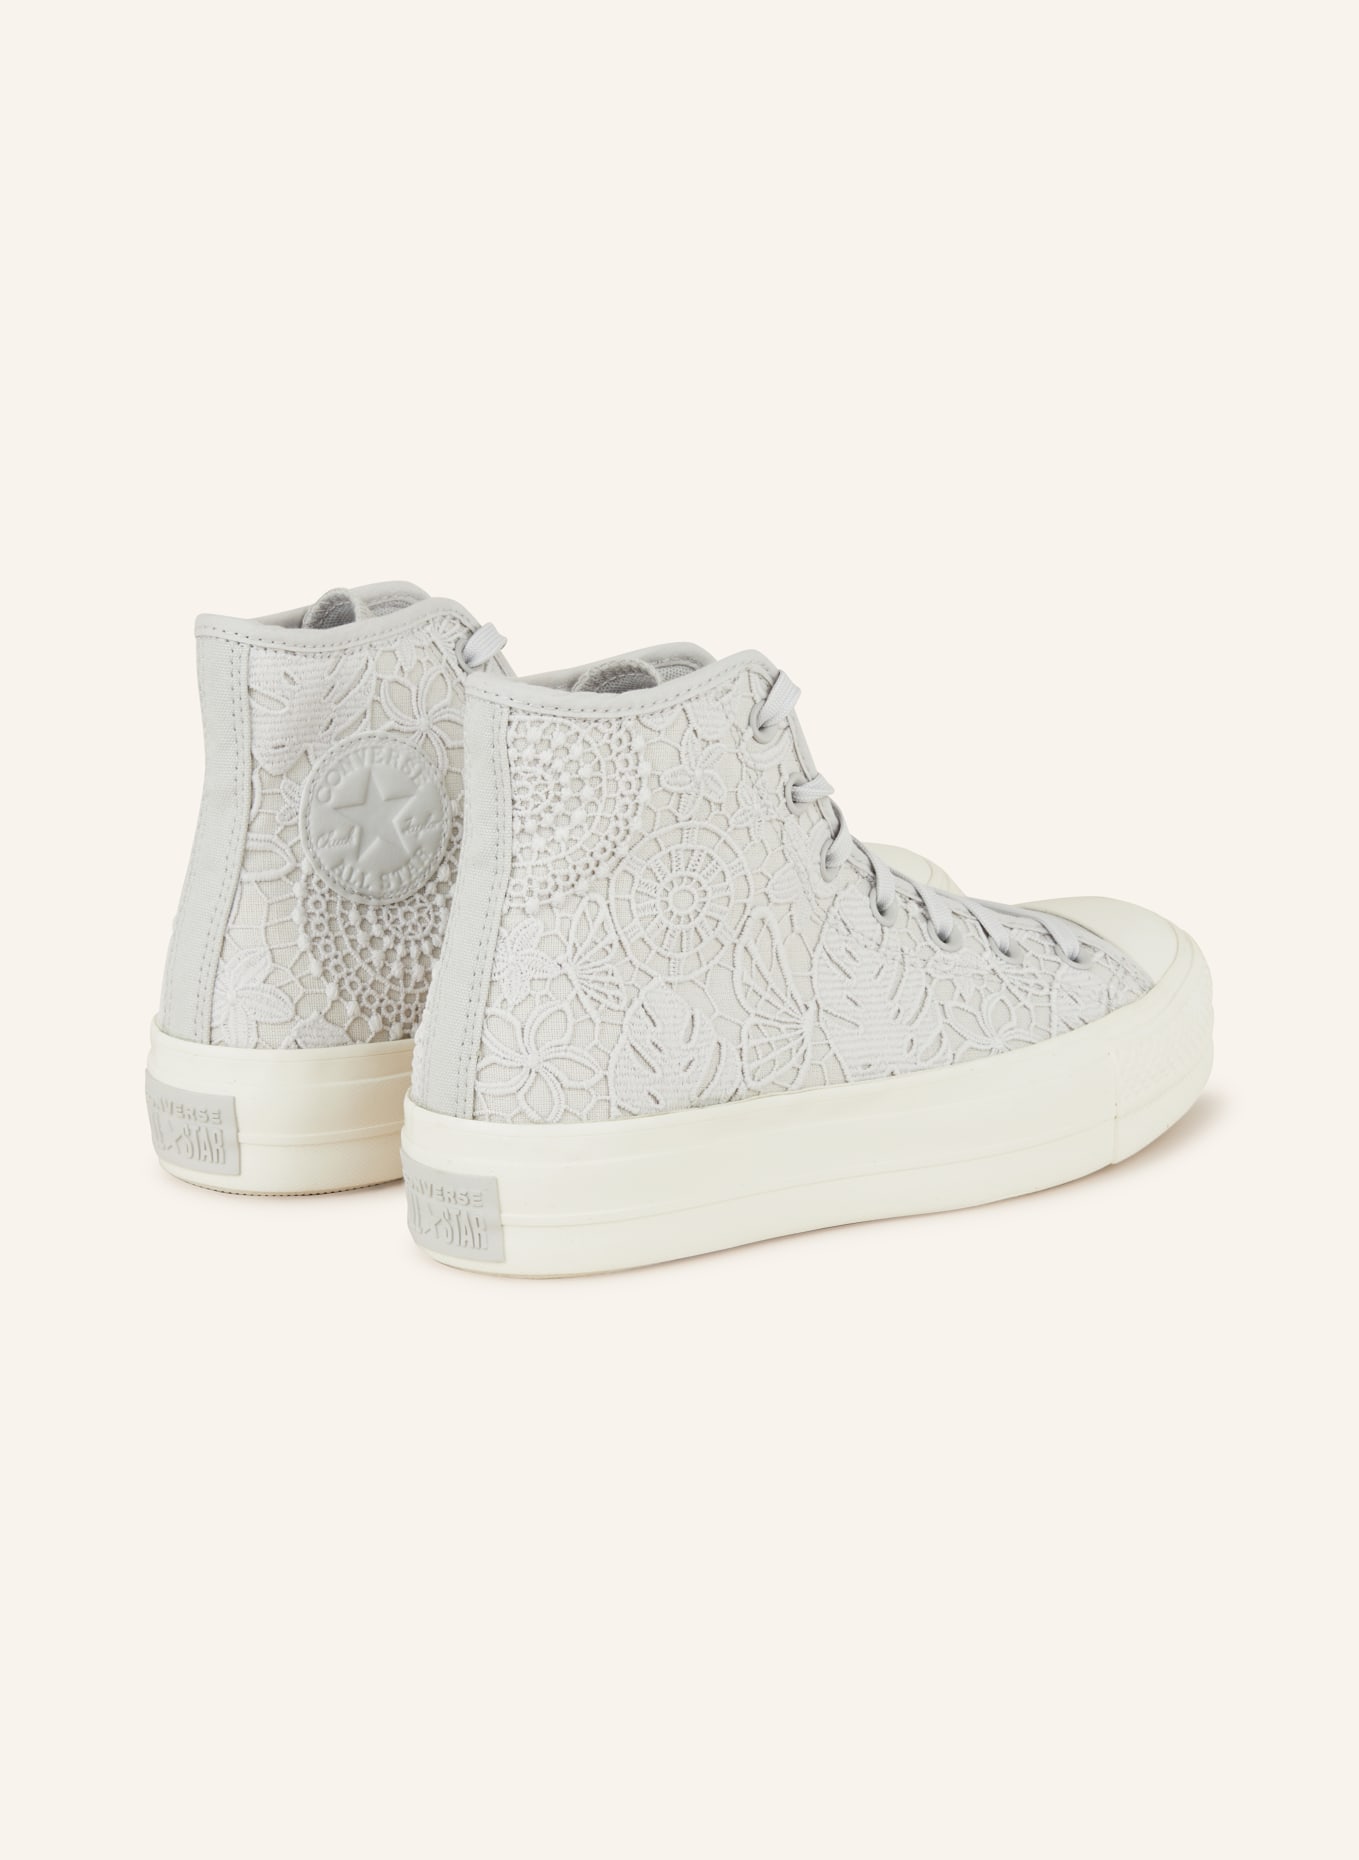 CONVERSE High-top sneakers CHUCK TAYLOR ALL STAR, Color: LIGHT GRAY (Image 2)